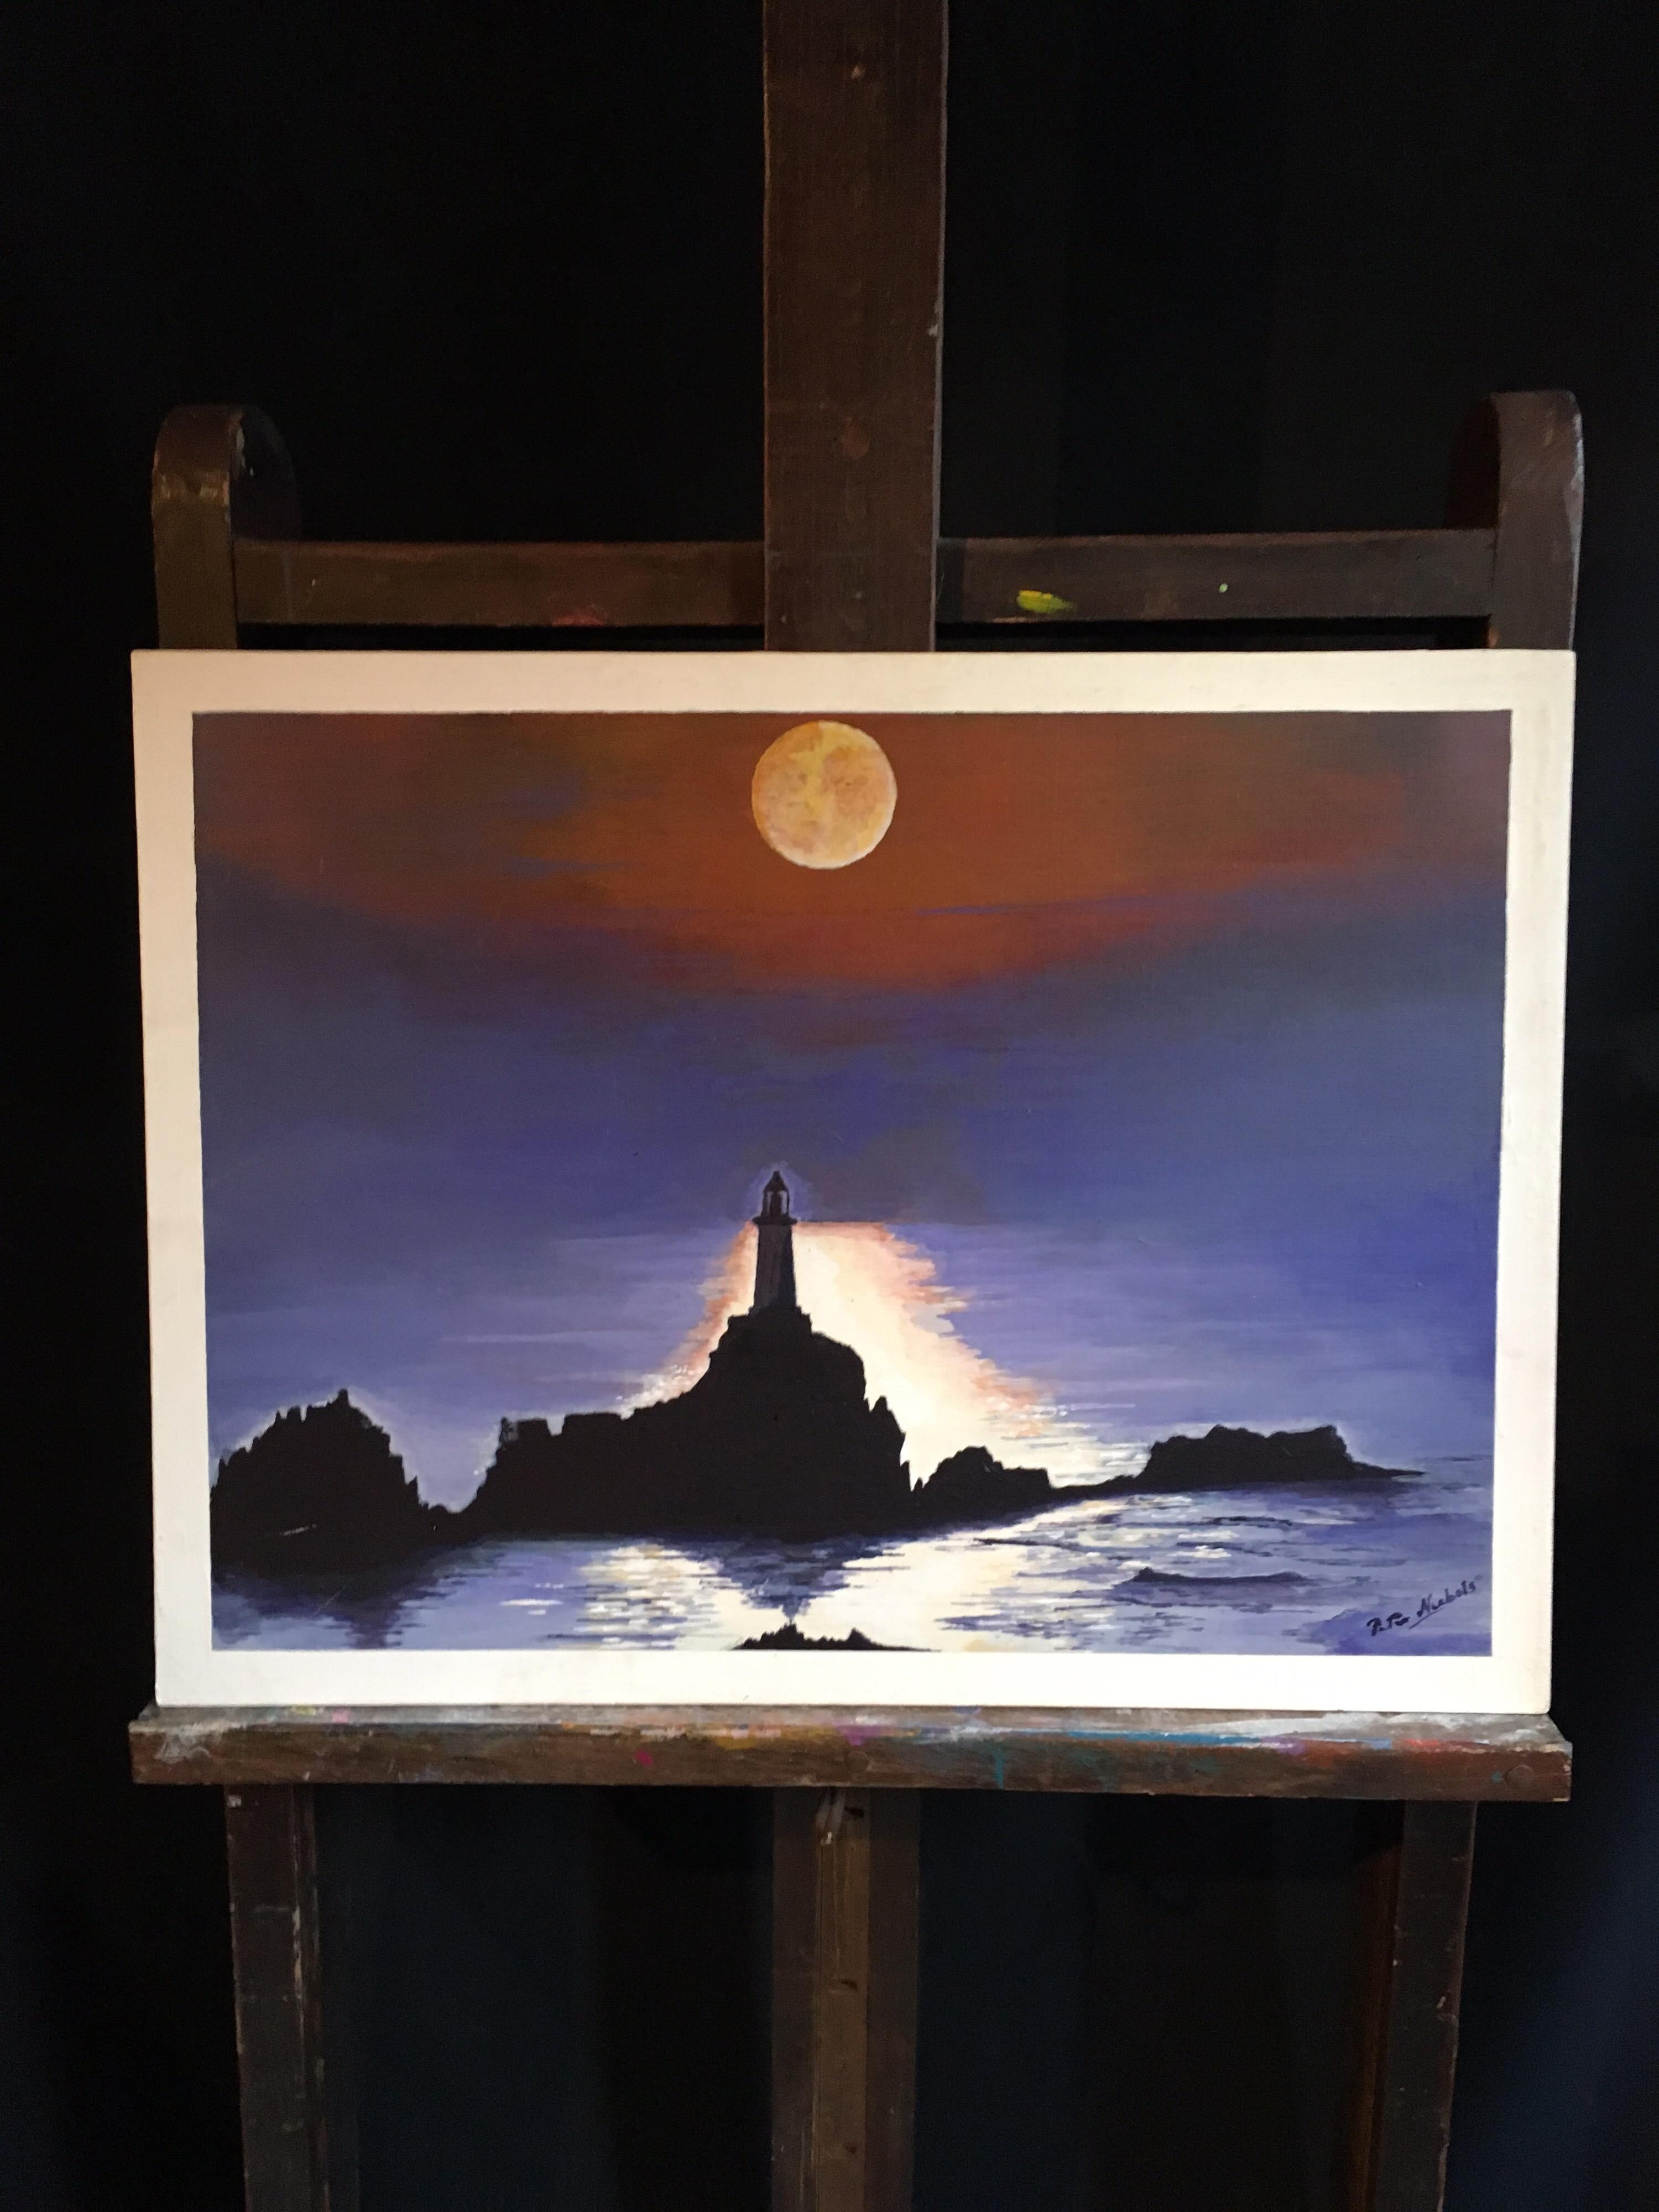 Lighthouse at Night, Silhouette Landscape Large Signed Oil Painting
by Peter Nichols, British contemporary artist
oil painting on board, unframed
signed by the artist on the lower left hand corner
board size: 18 x 24 inches

Superb original oil